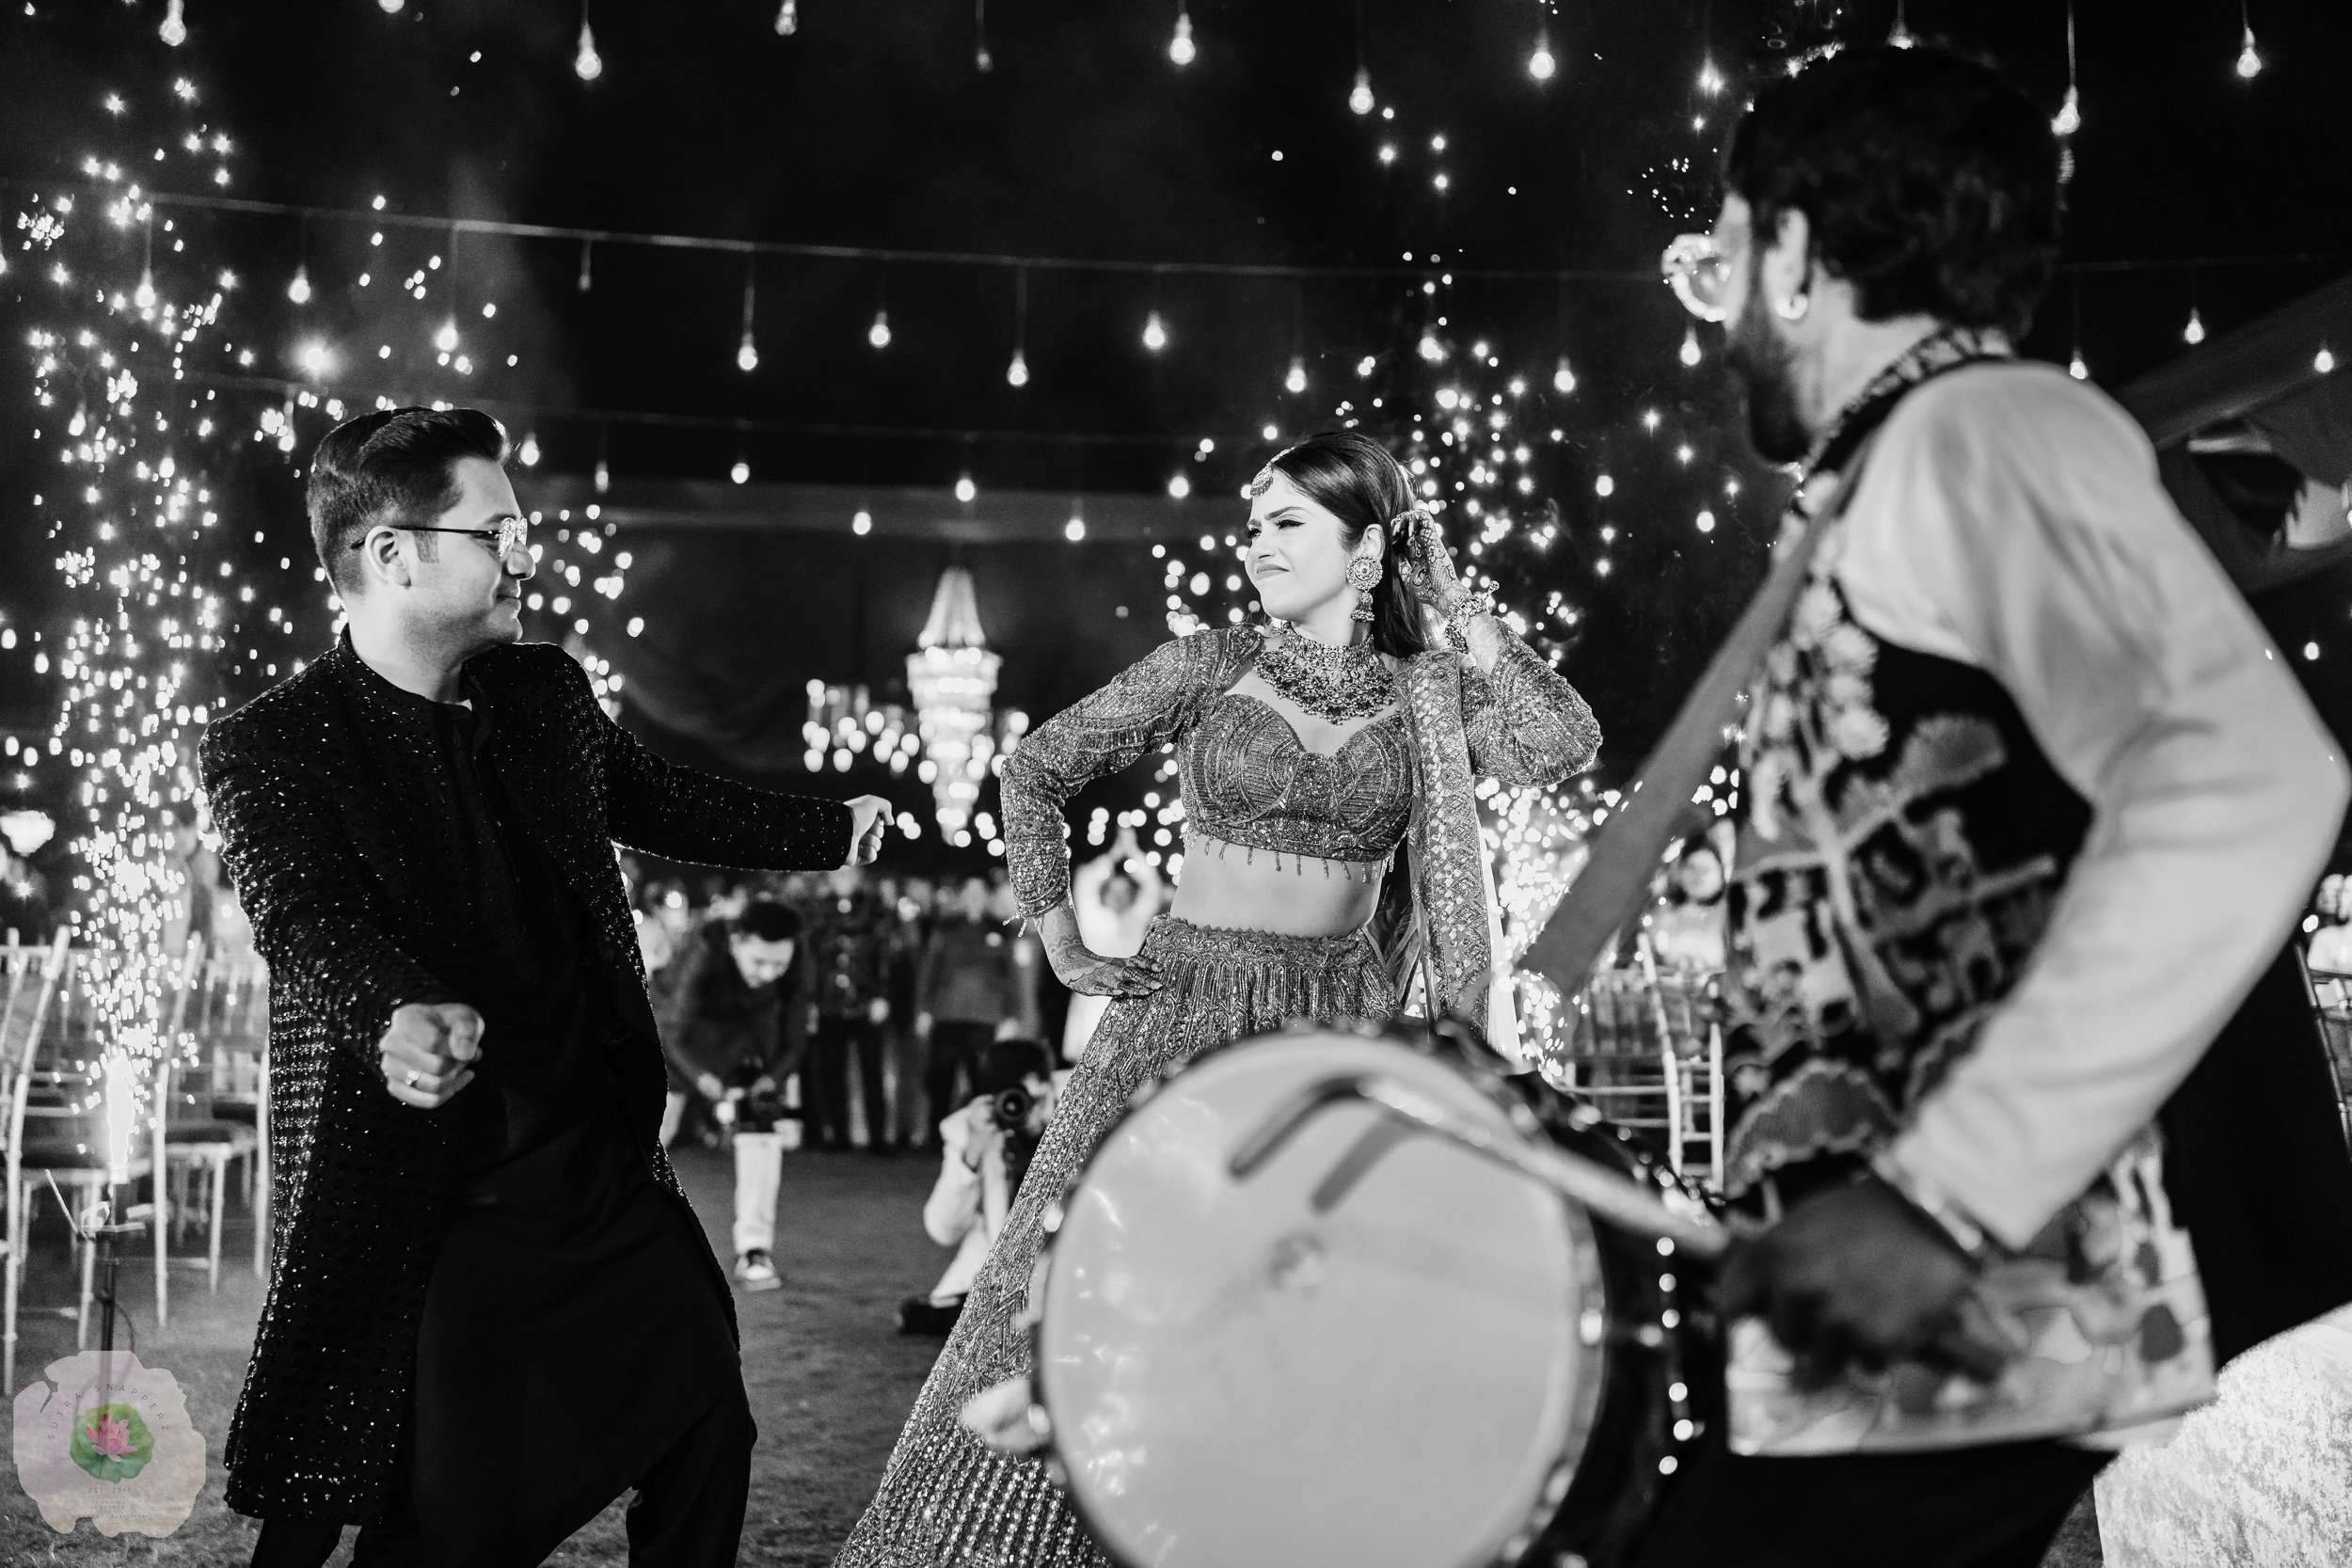 ecreating Anant Ambani's Pre-Wedding Grandeur with Sutra Snapperz